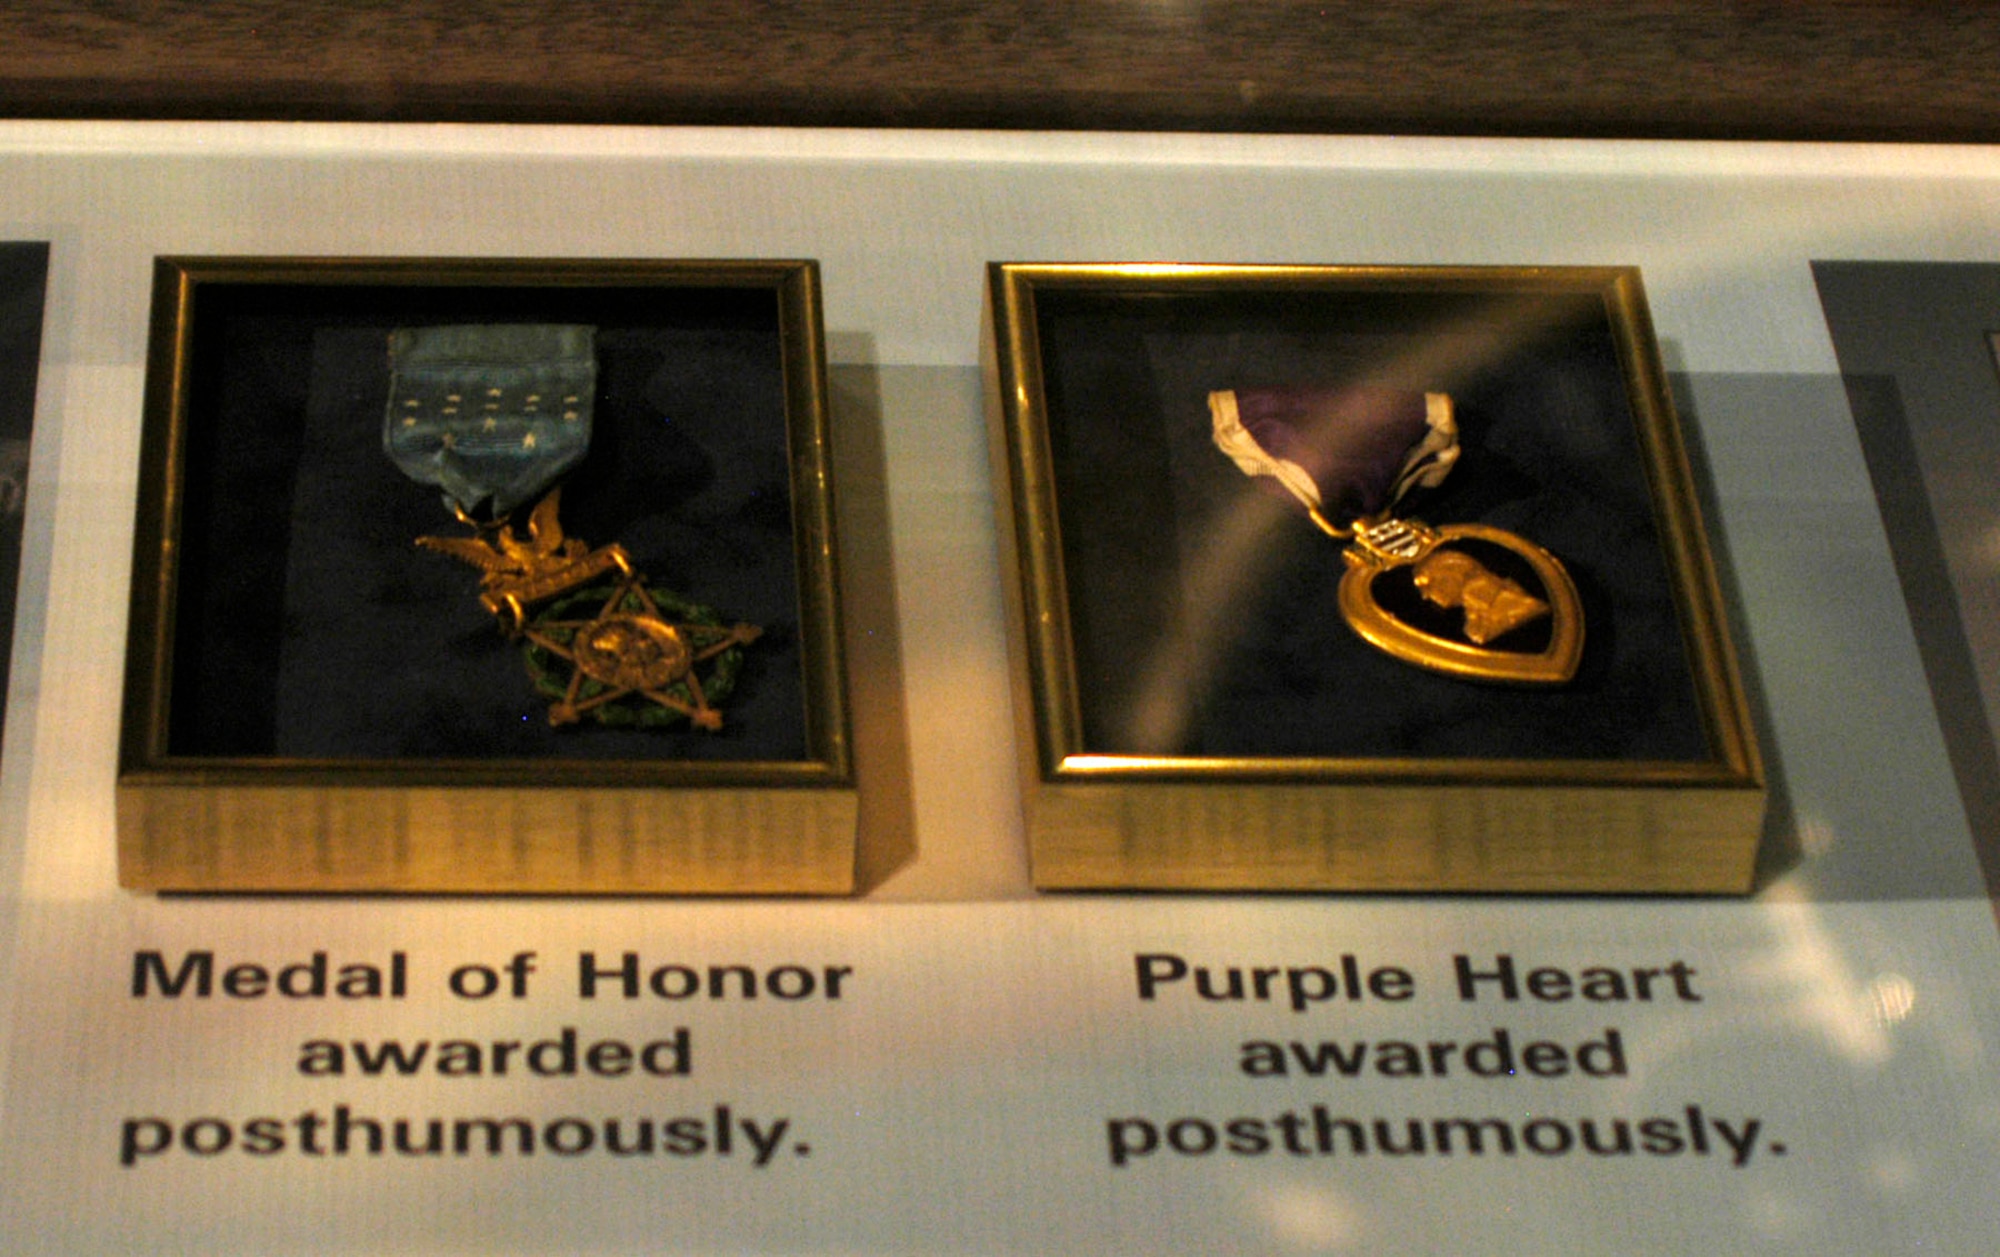 DAYTON, Ohio - 1st Lt. Jack W. Mathis' Medal of Honor and Purple Heart on display in the World War II Gallery at the National Museum of the U.S. Air Force. (U.S. Air Force photo)